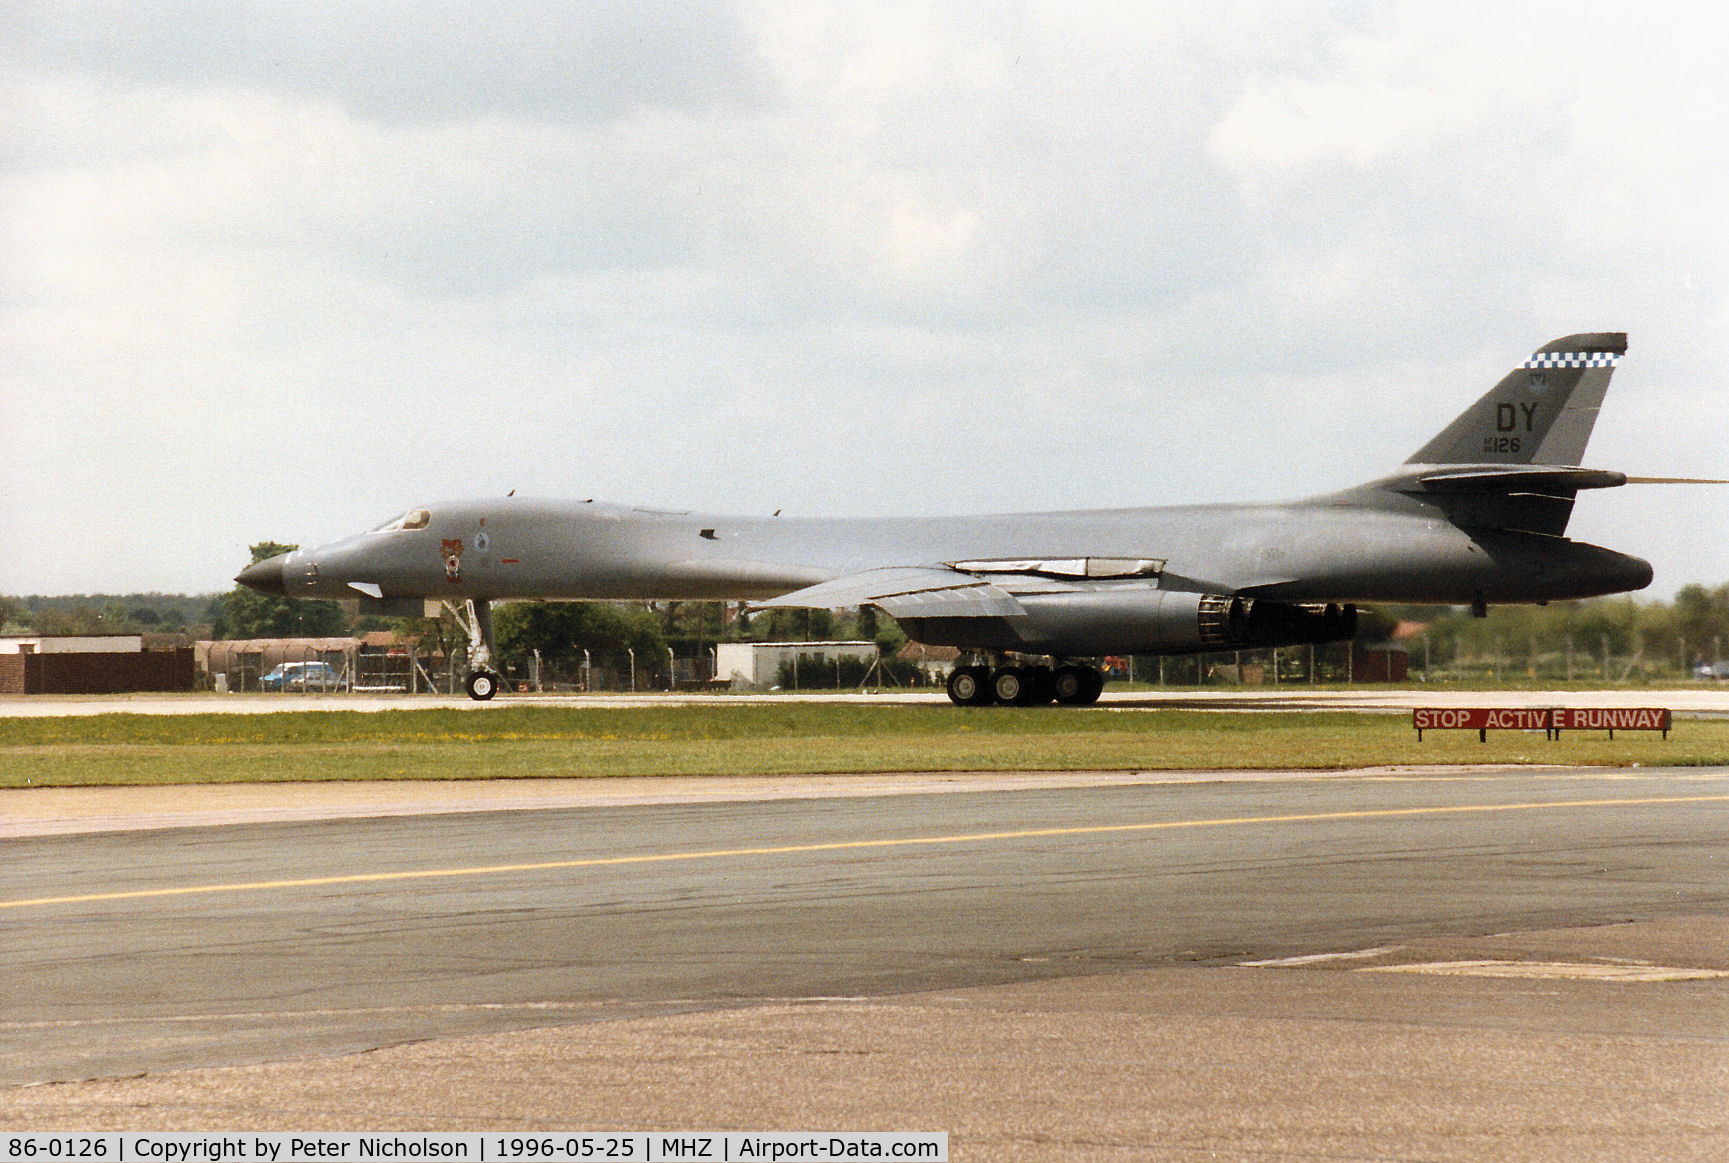 86-0126, 1986 Rockwell B-1B Lancer C/N 86, B-1B Lancer named Hungry Devil of 28th Bomb Squadron/7th Bombardment Wing joining the active runway at the 1996 RAF Mildenhall Air Fete.